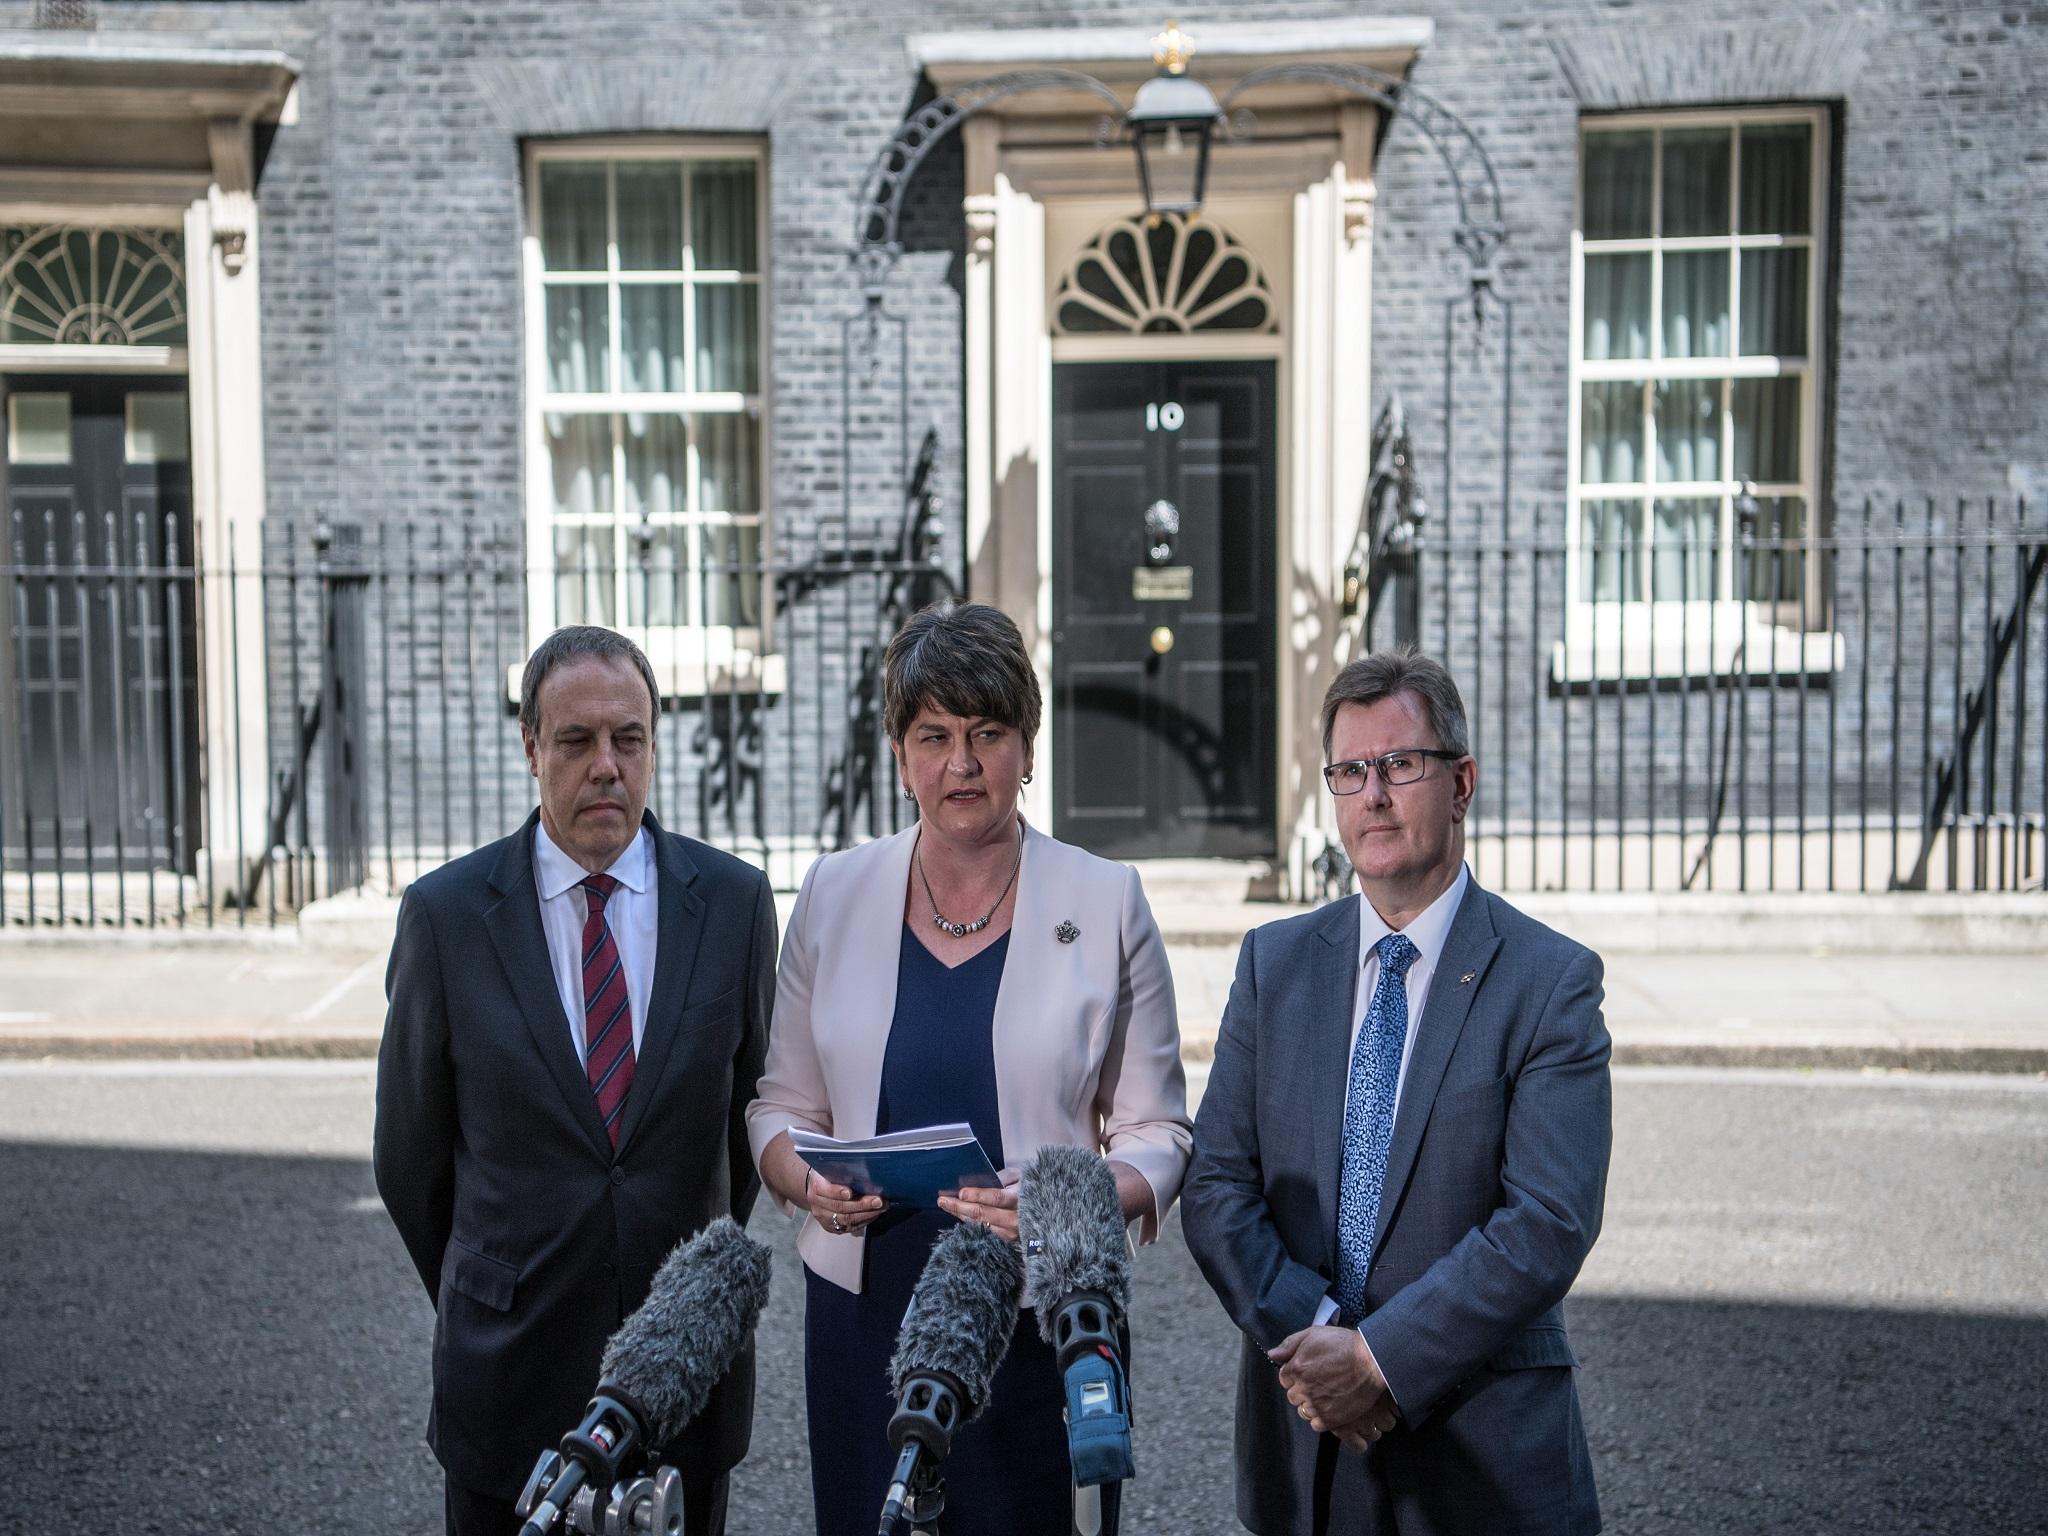 The DUP's Arlene Foster, Nigel Dodds and Jeffrey Donaldson speak to the media as they leave Downing Street on Monday